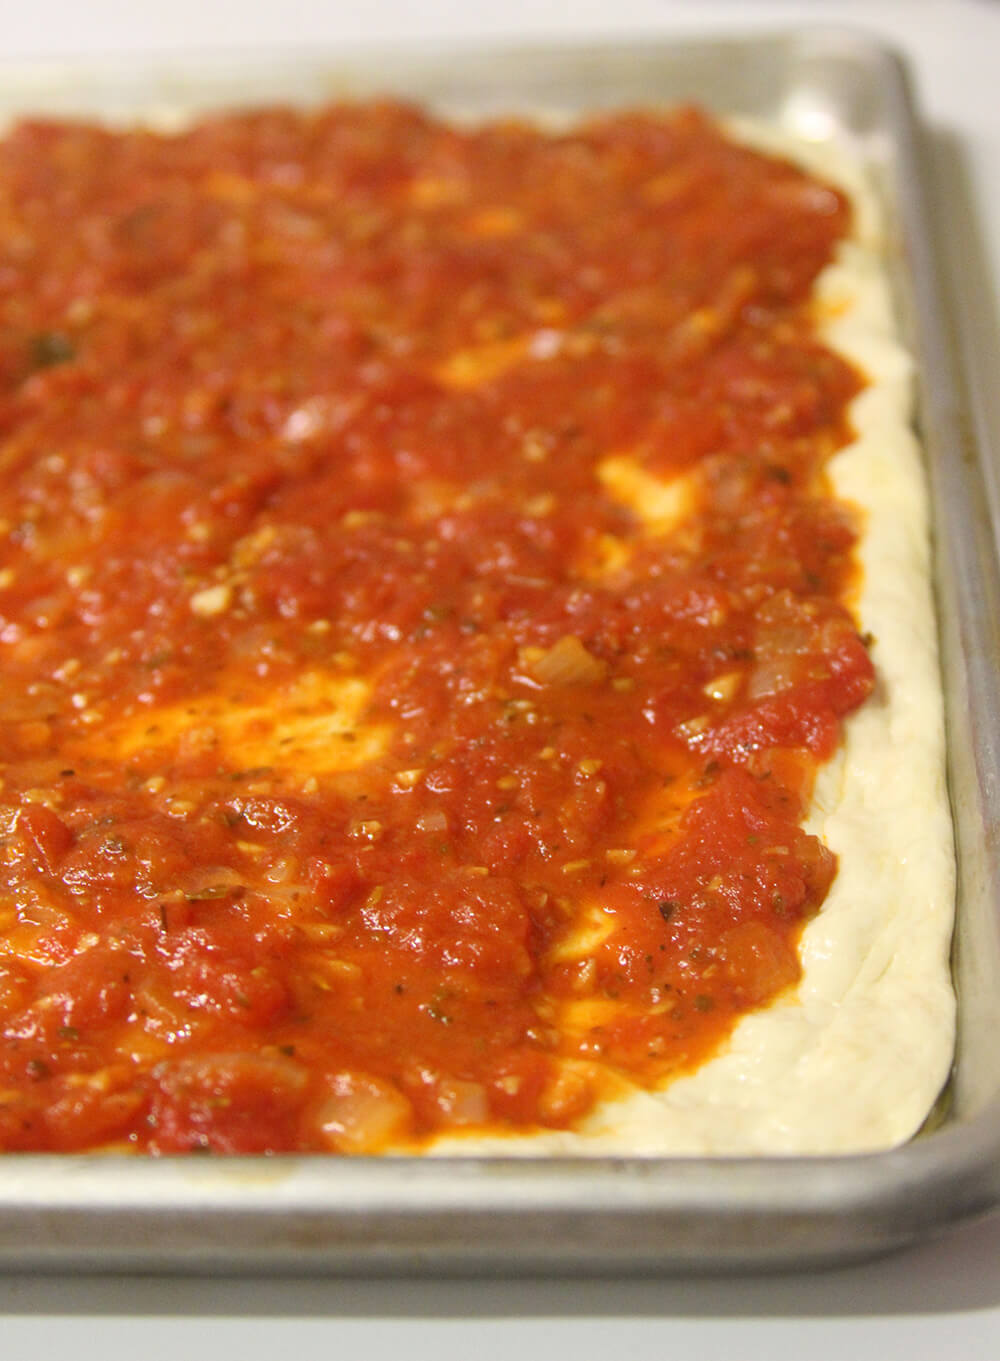 A tomato pie right before it goes into the oven